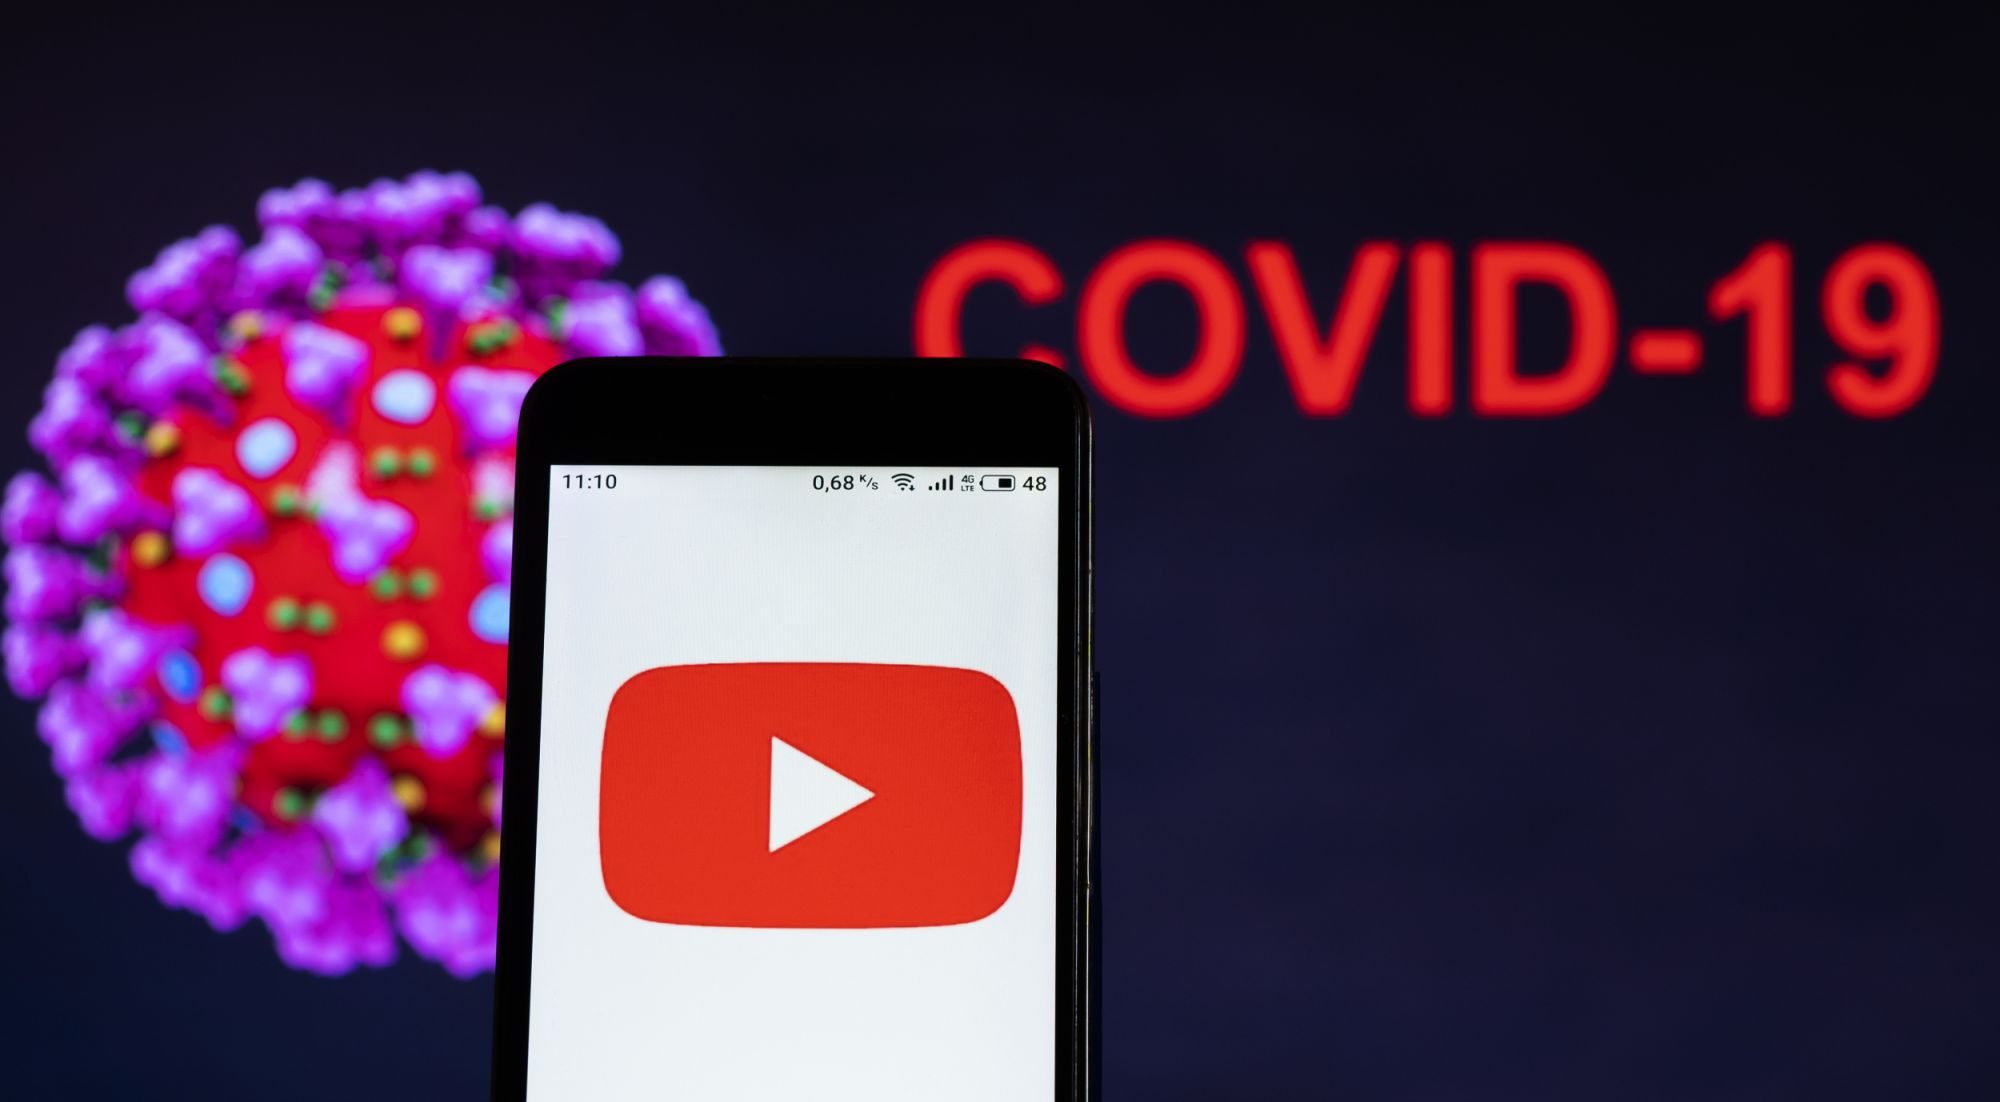 UKRAINE - 2020/12/18: In this photo illustration, a Youtube logo seen displayed on a smartphone with a computer model of the COVID-19 coronavirus in the background. (Photo Illustration by Igor Golovniov/SOPA Images/LightRocket via Getty Images)